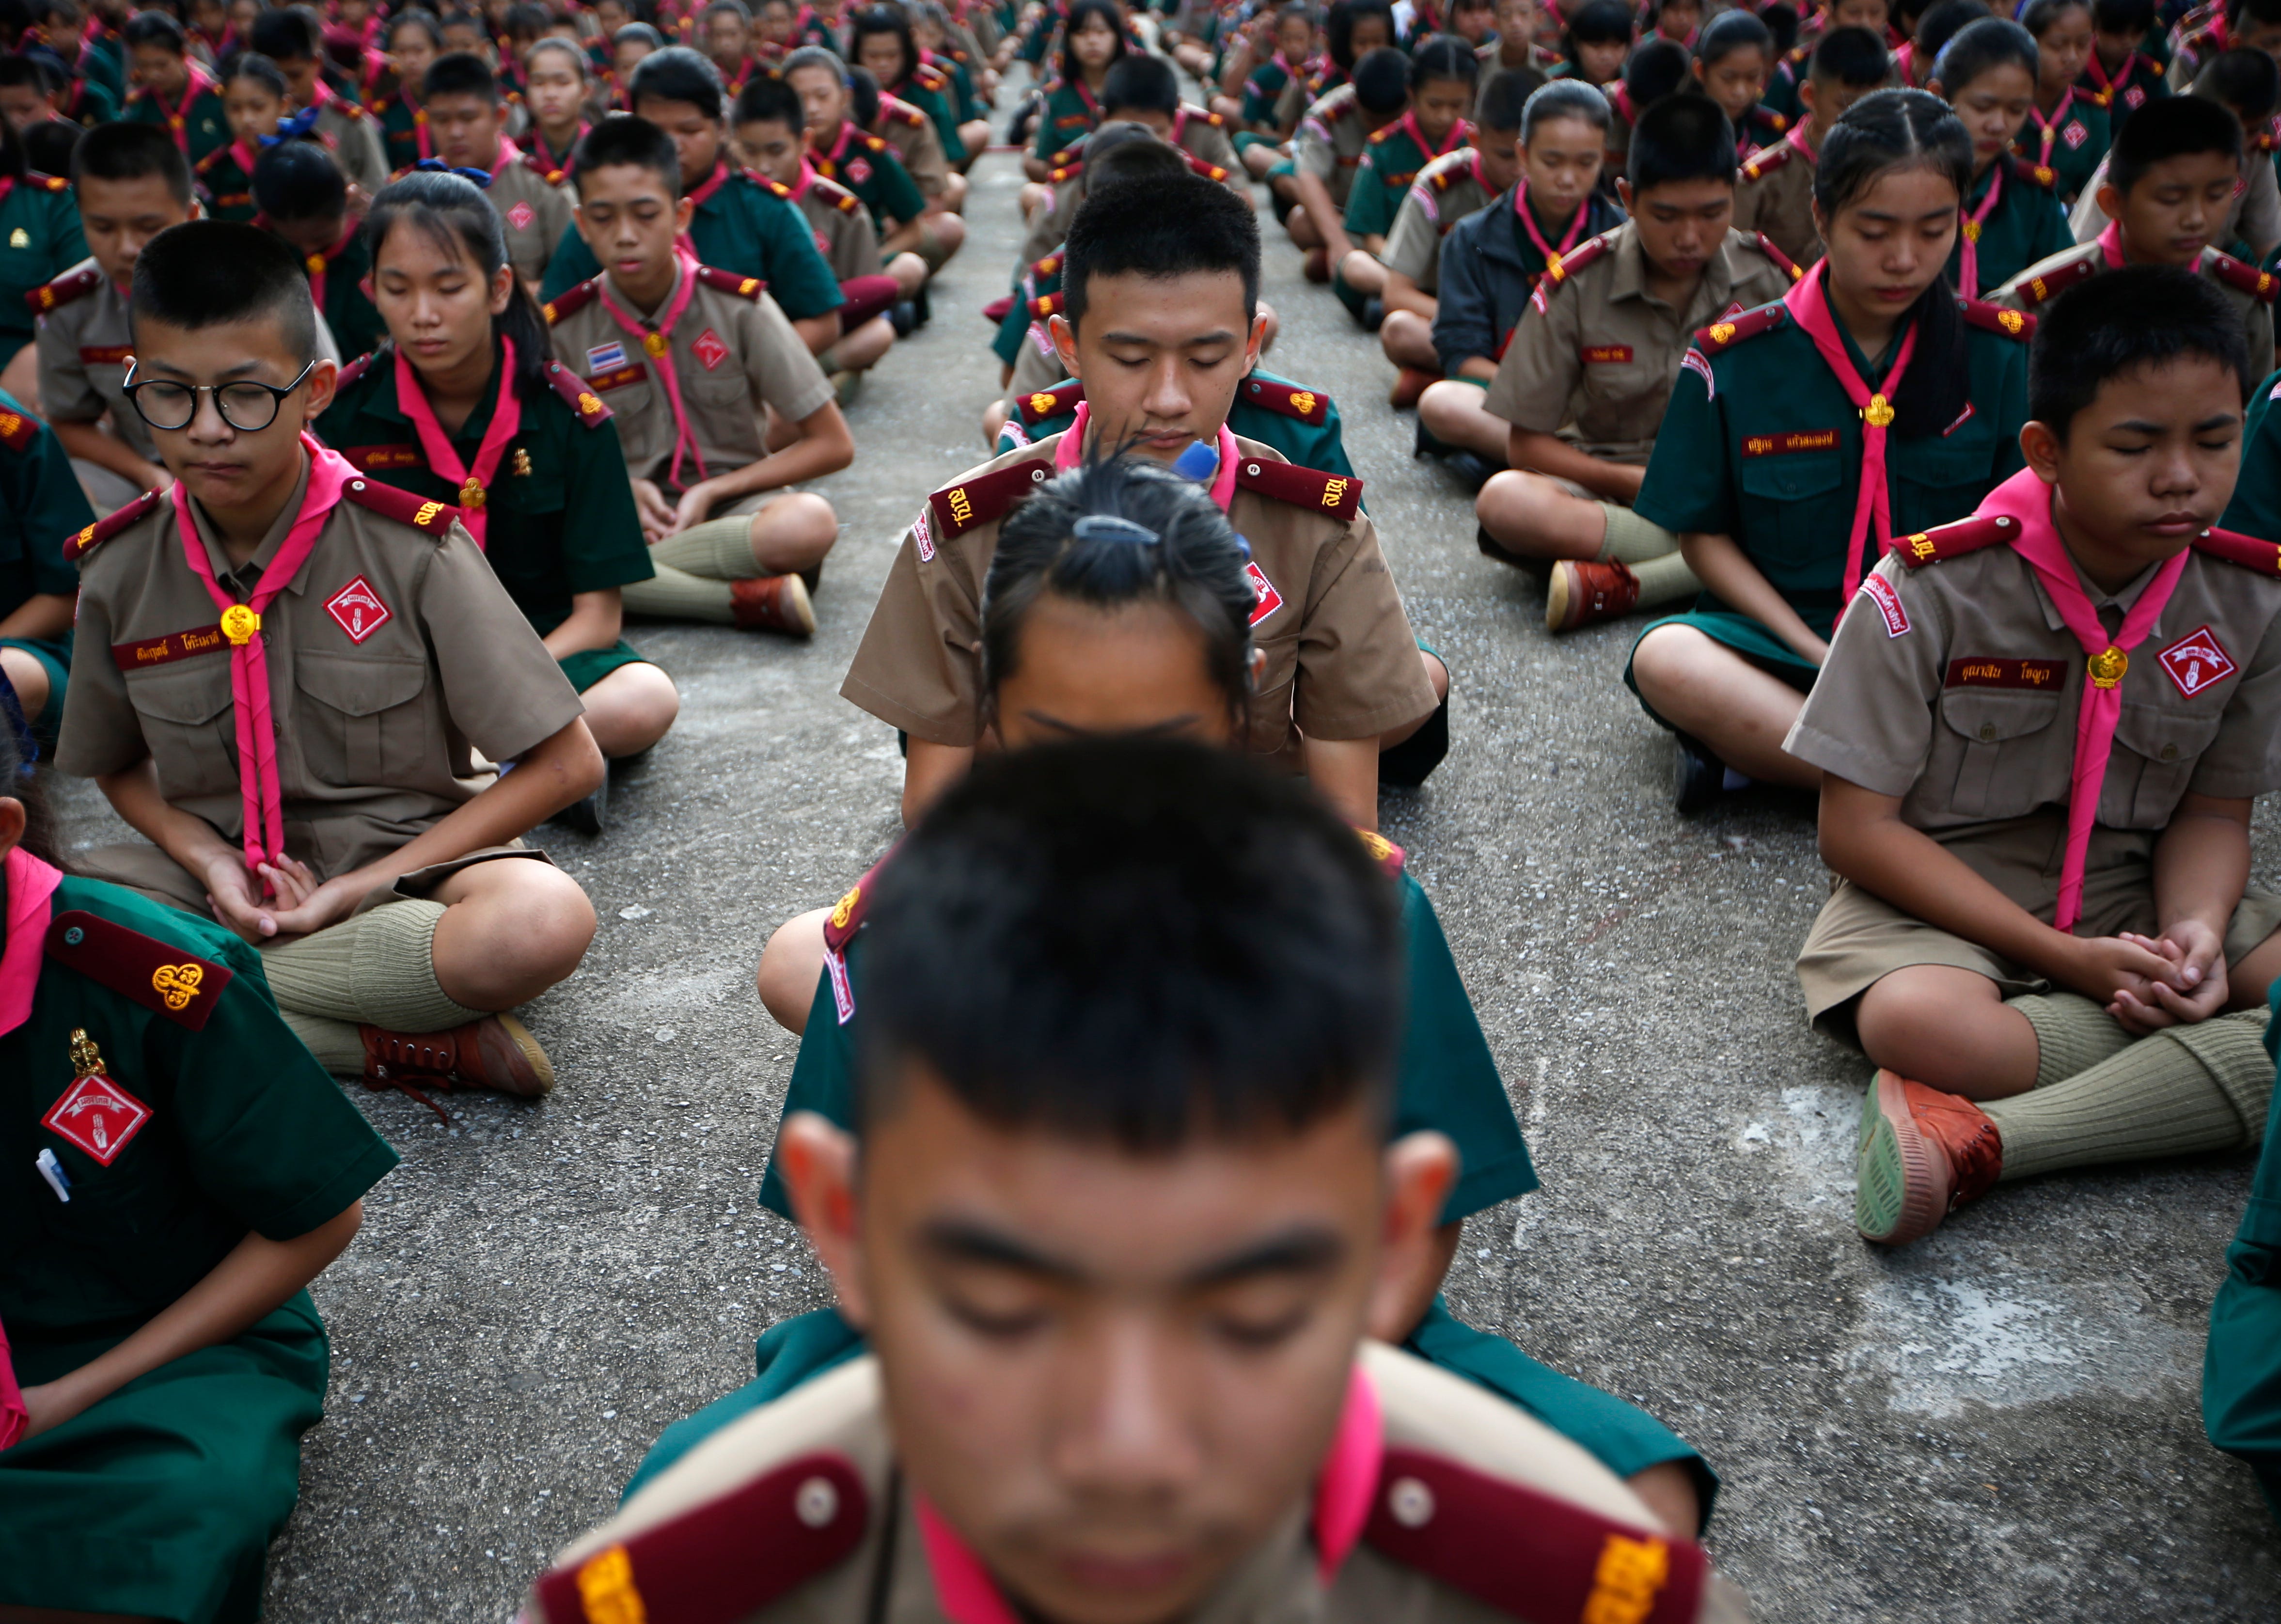  Thai students practice meditation in an effort to send regards to the ongoing rescue operations for the child soccer team and their assistant coach, at Maesaiprasitsart school in Mae Sai district, Chiang Rai province, Thailand.